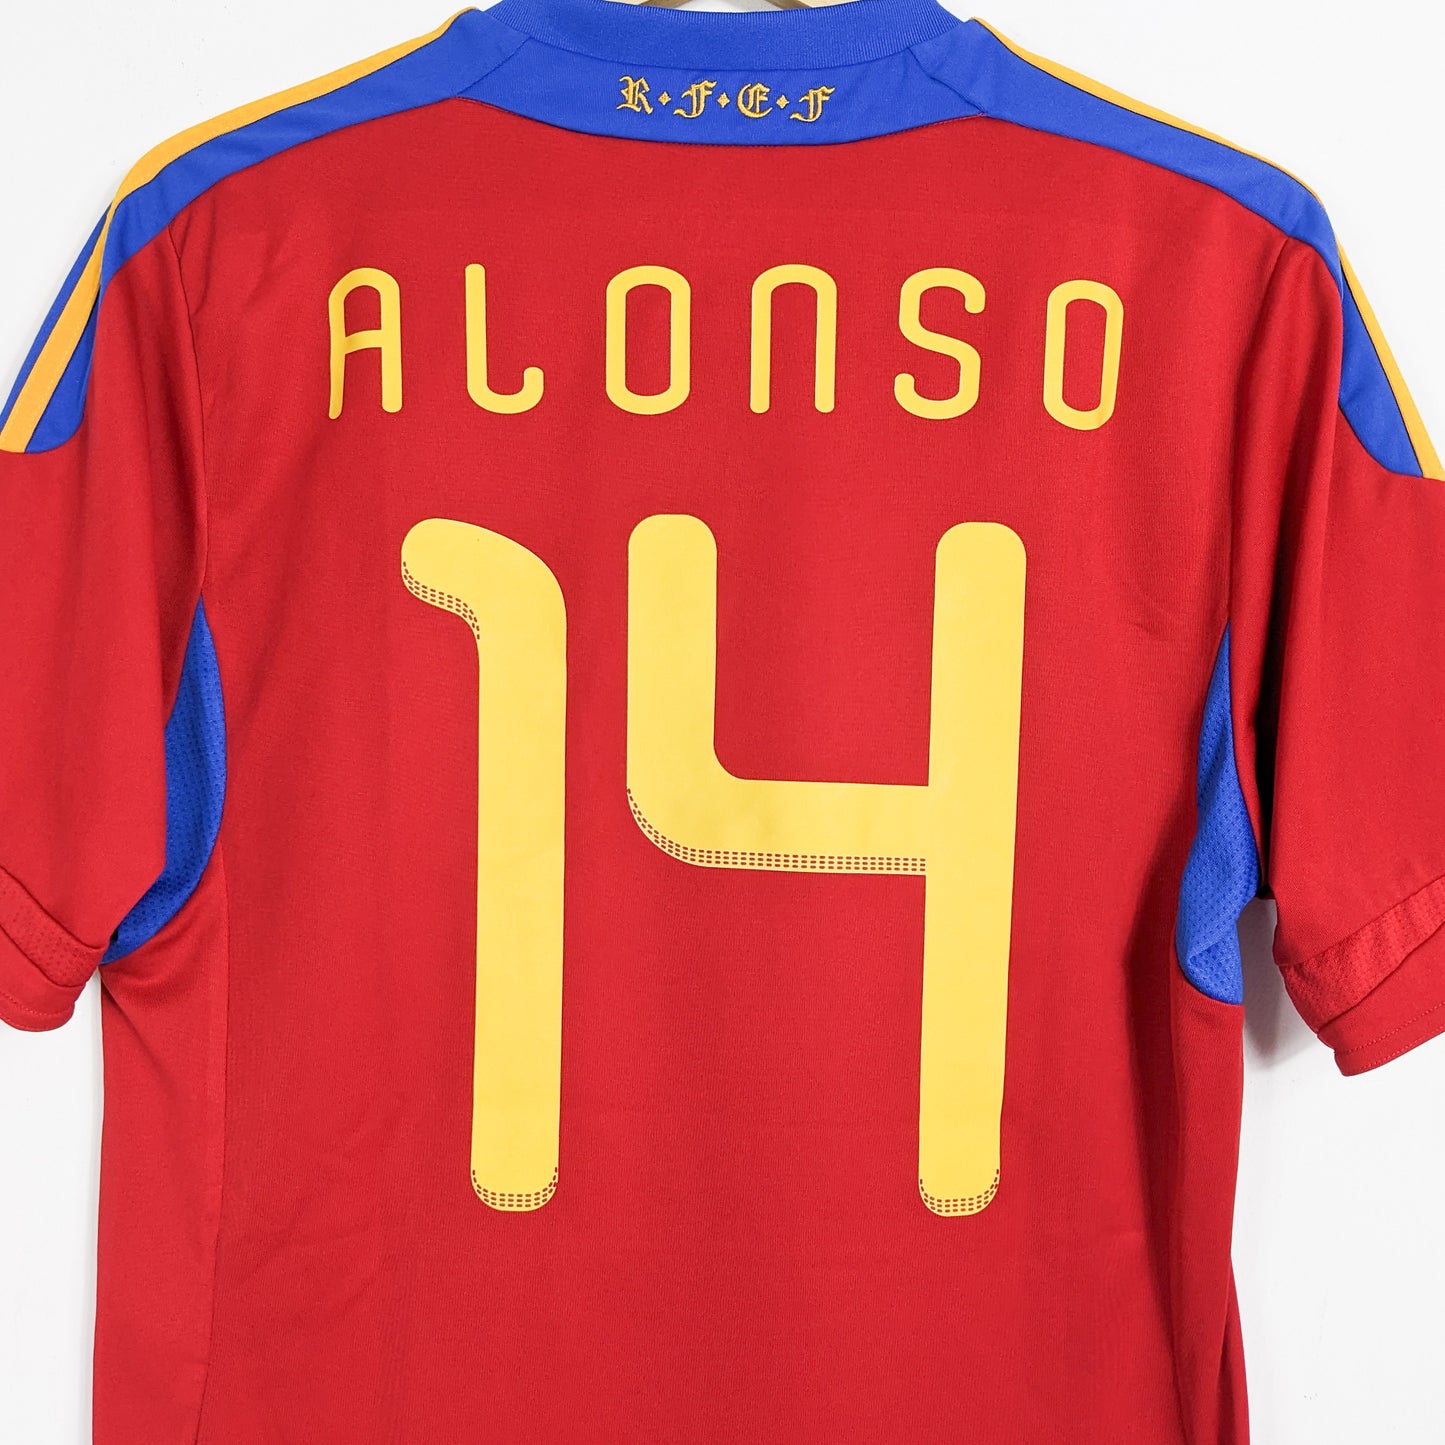 Authentic Spain 2011/2012 Home - Alonso #14 Size M